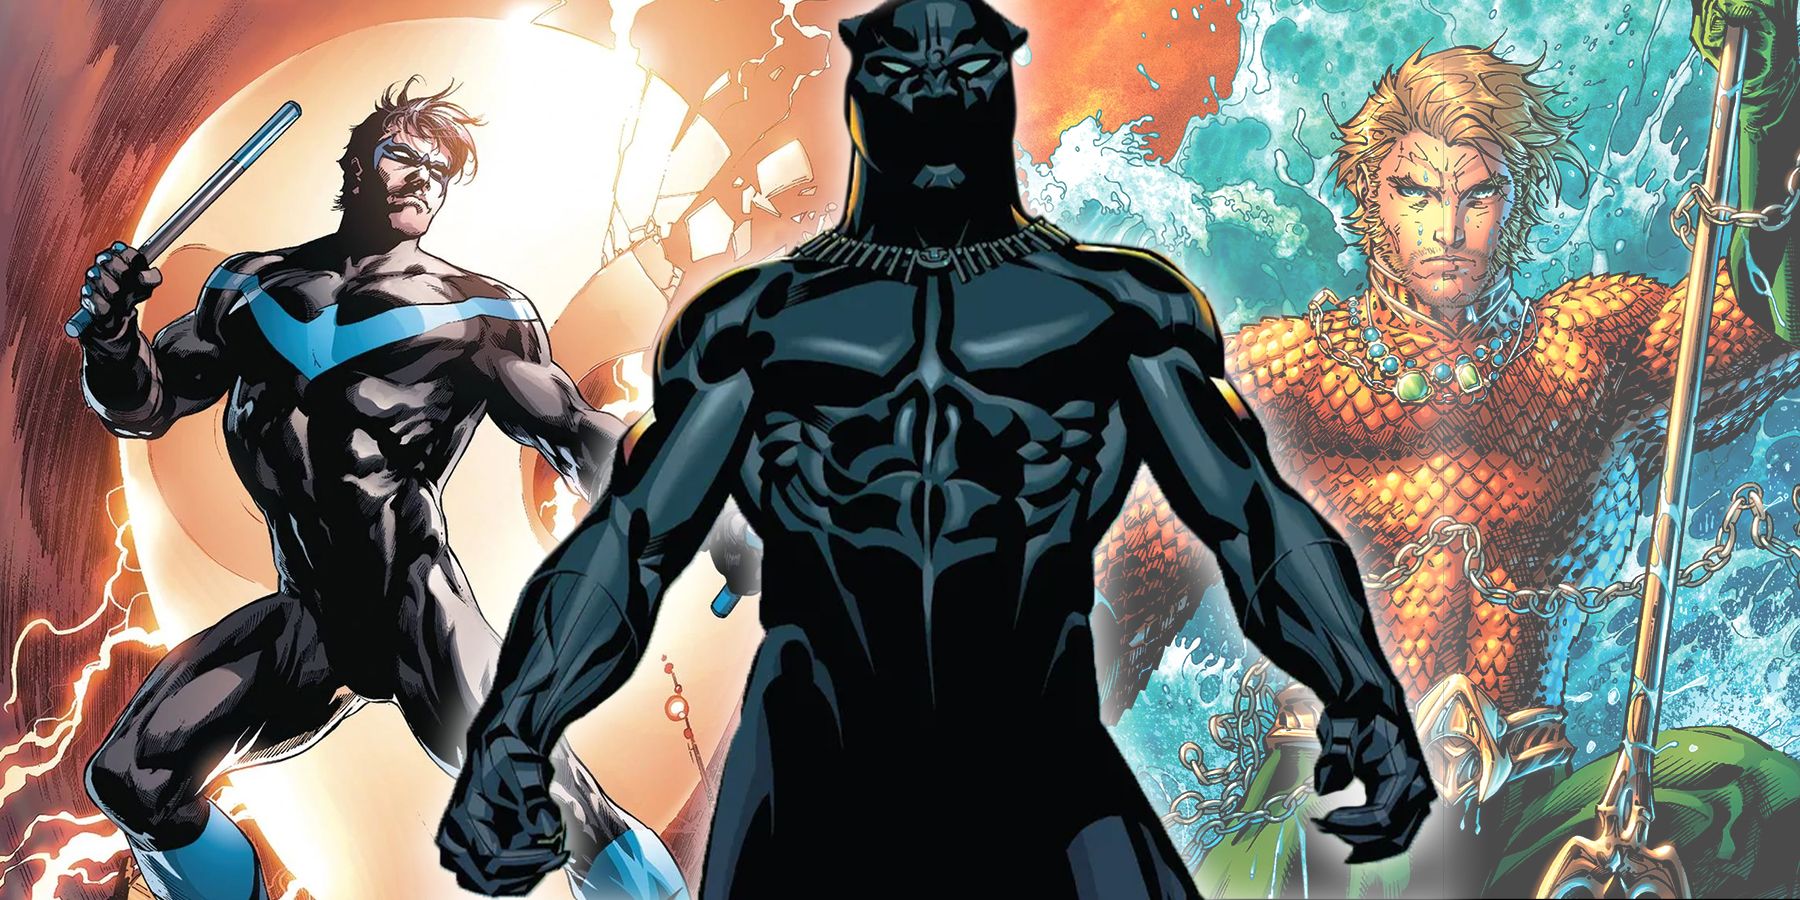 Black Panther vs DC heroes like Nightwing and Aquaman